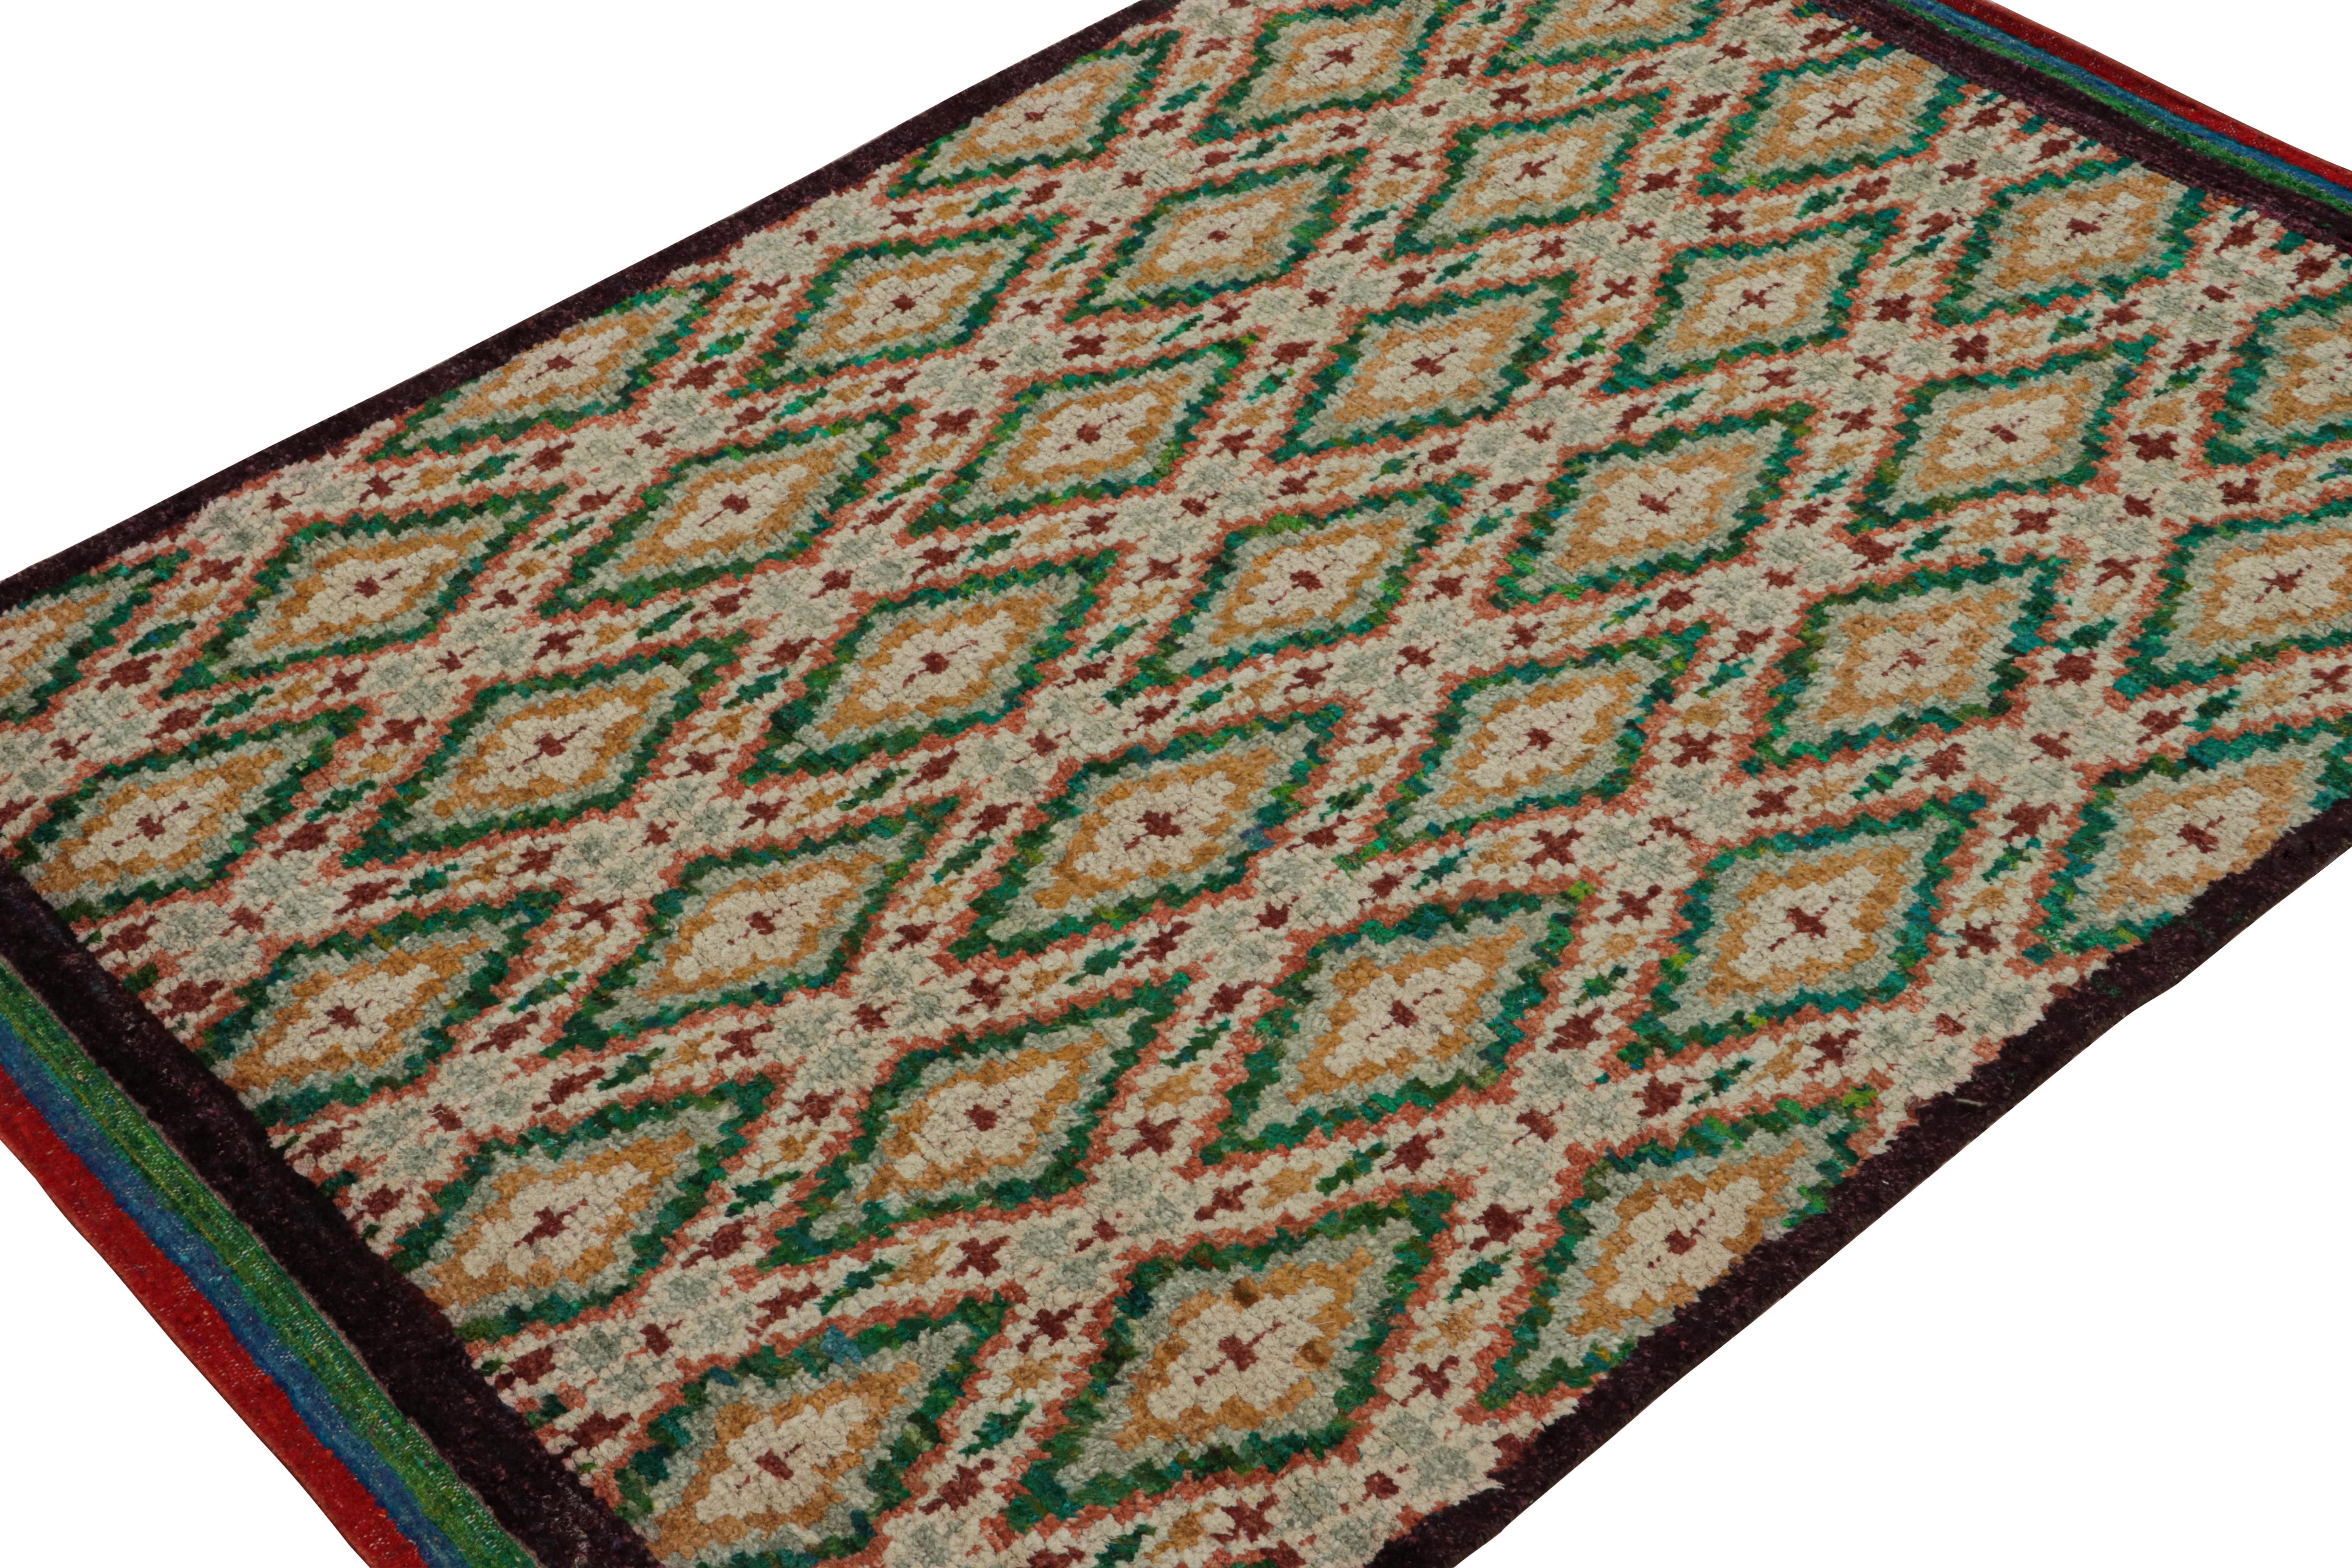 Hand-knotted in wool, silk & cotton, this 6x8 rug is a new addition to the Moroccan Collection by Rug & Kilim. 

On the Design

This rug enjoys primitivist style with patterns in tones of green, gold, red & black. Connoisseurs will admire this as a